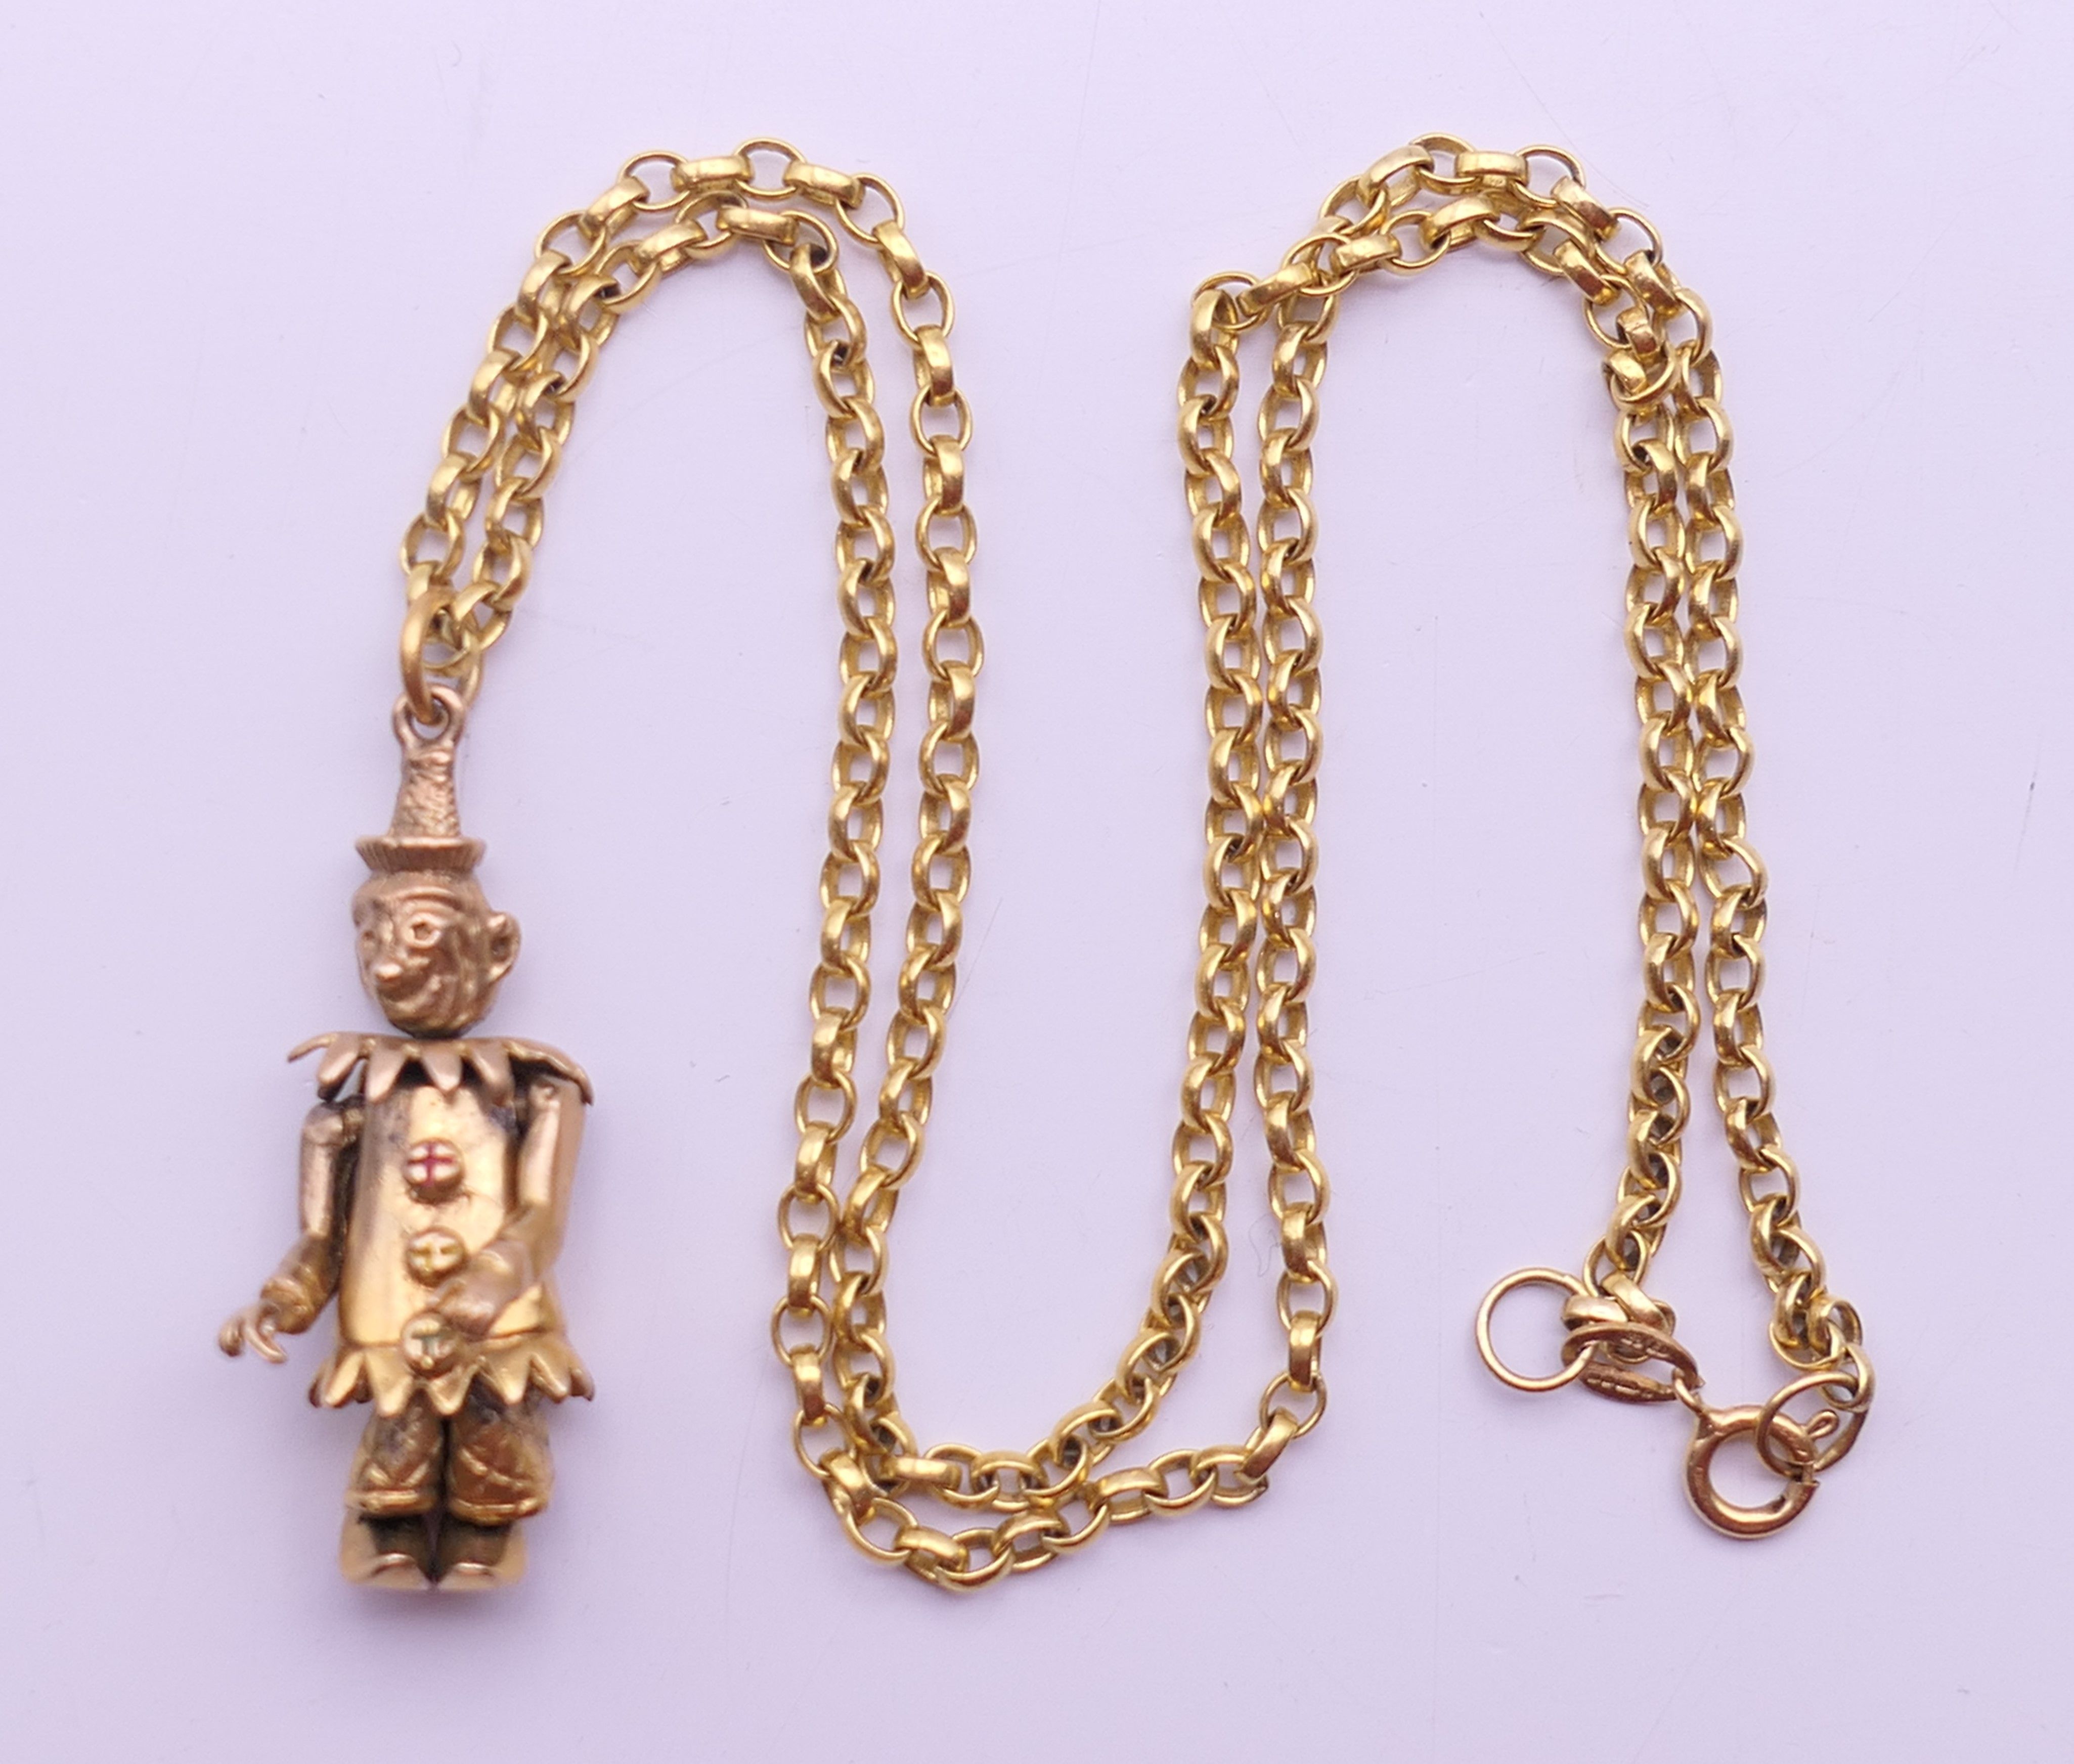 A 9 ct gold articulated clown form pendant on 9 ct gold chain. Clown 3 cm high, chain 40 cm long. - Image 3 of 6